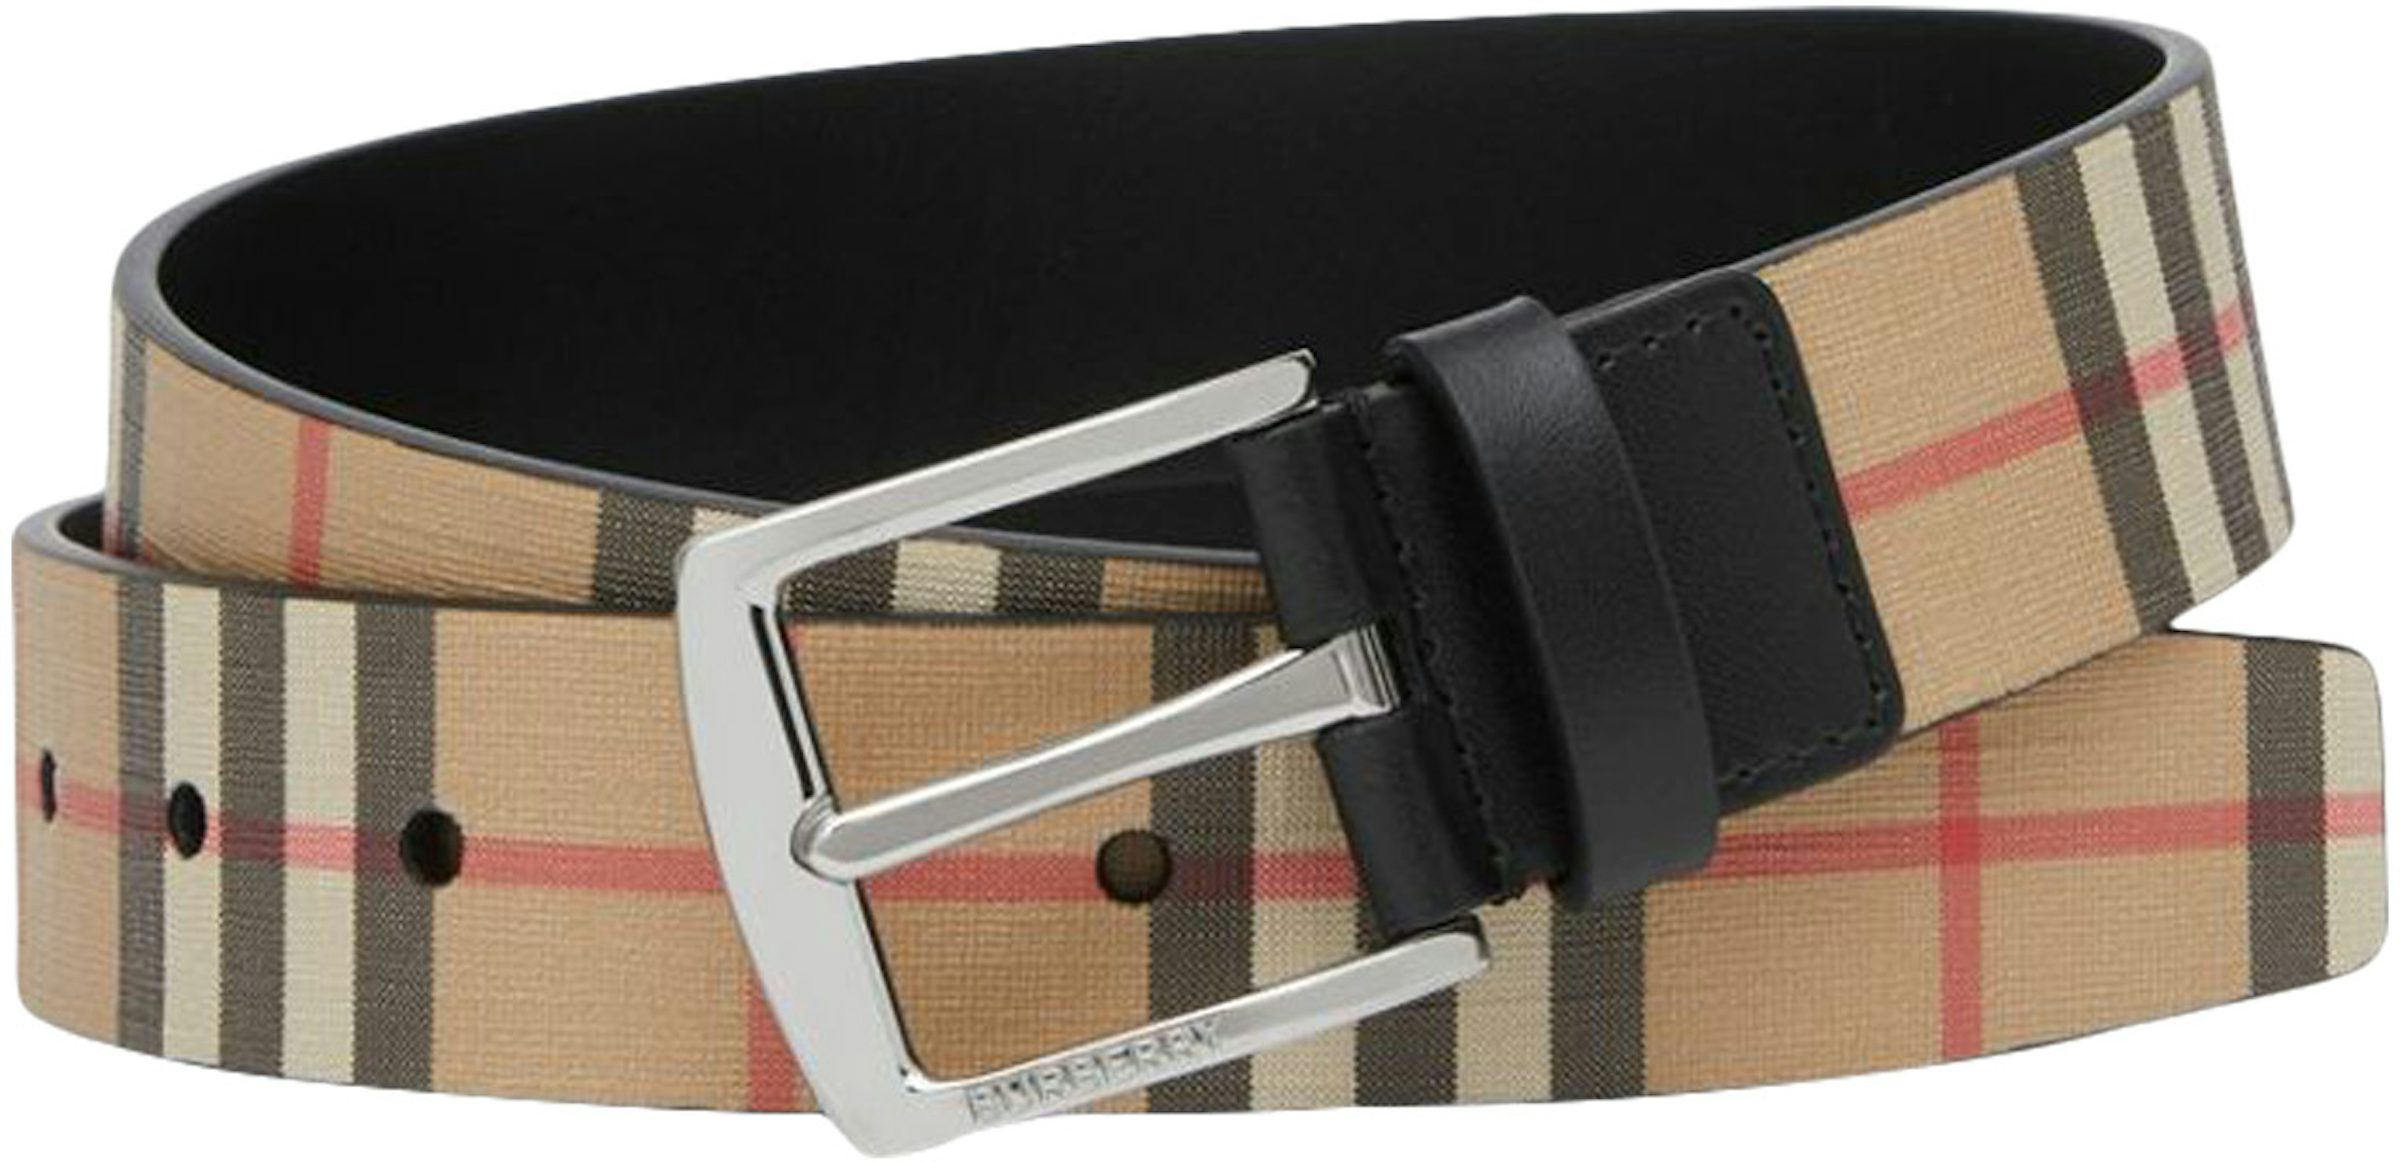 Burberry Reversible Exaggerated Check E-Canvas & Leather Belt Women's